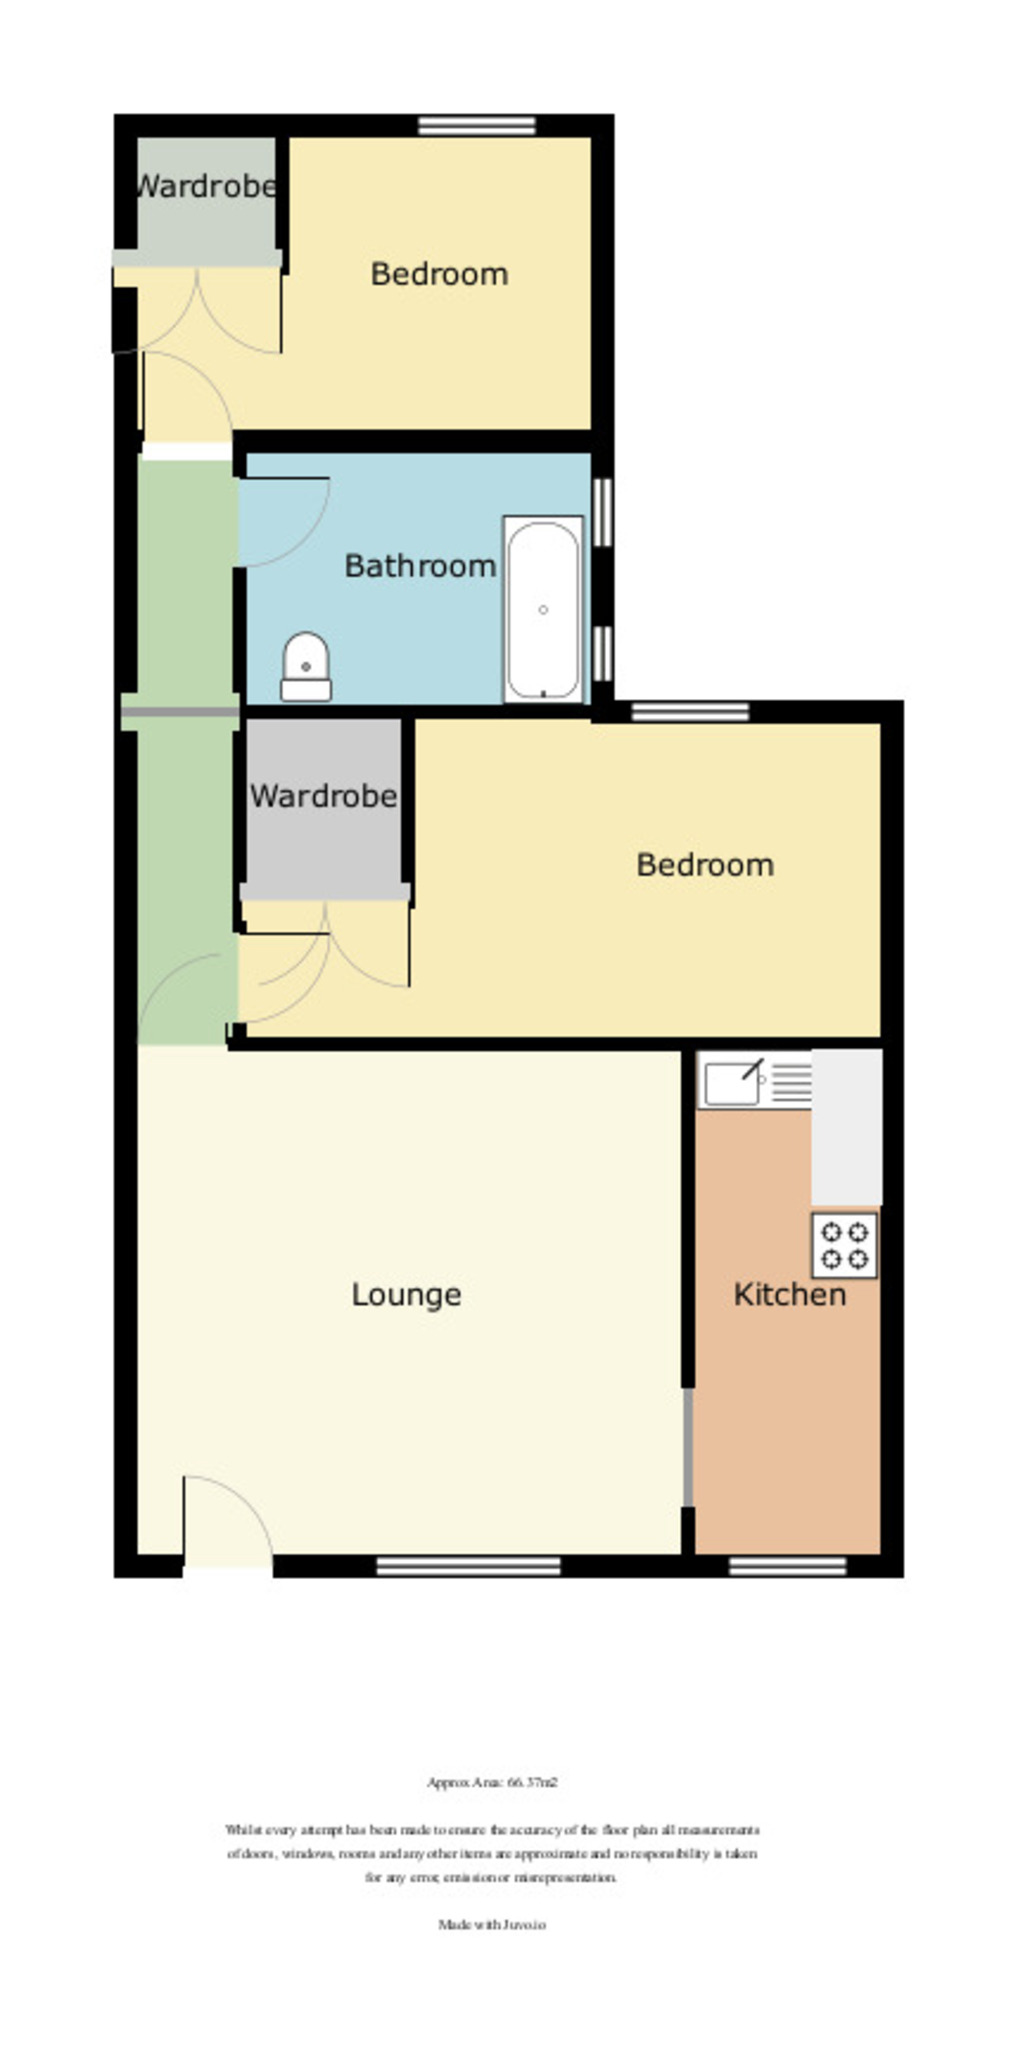 2 bed ground floor flat to rent in Colombia Road, Bournemouth - Property floorplan